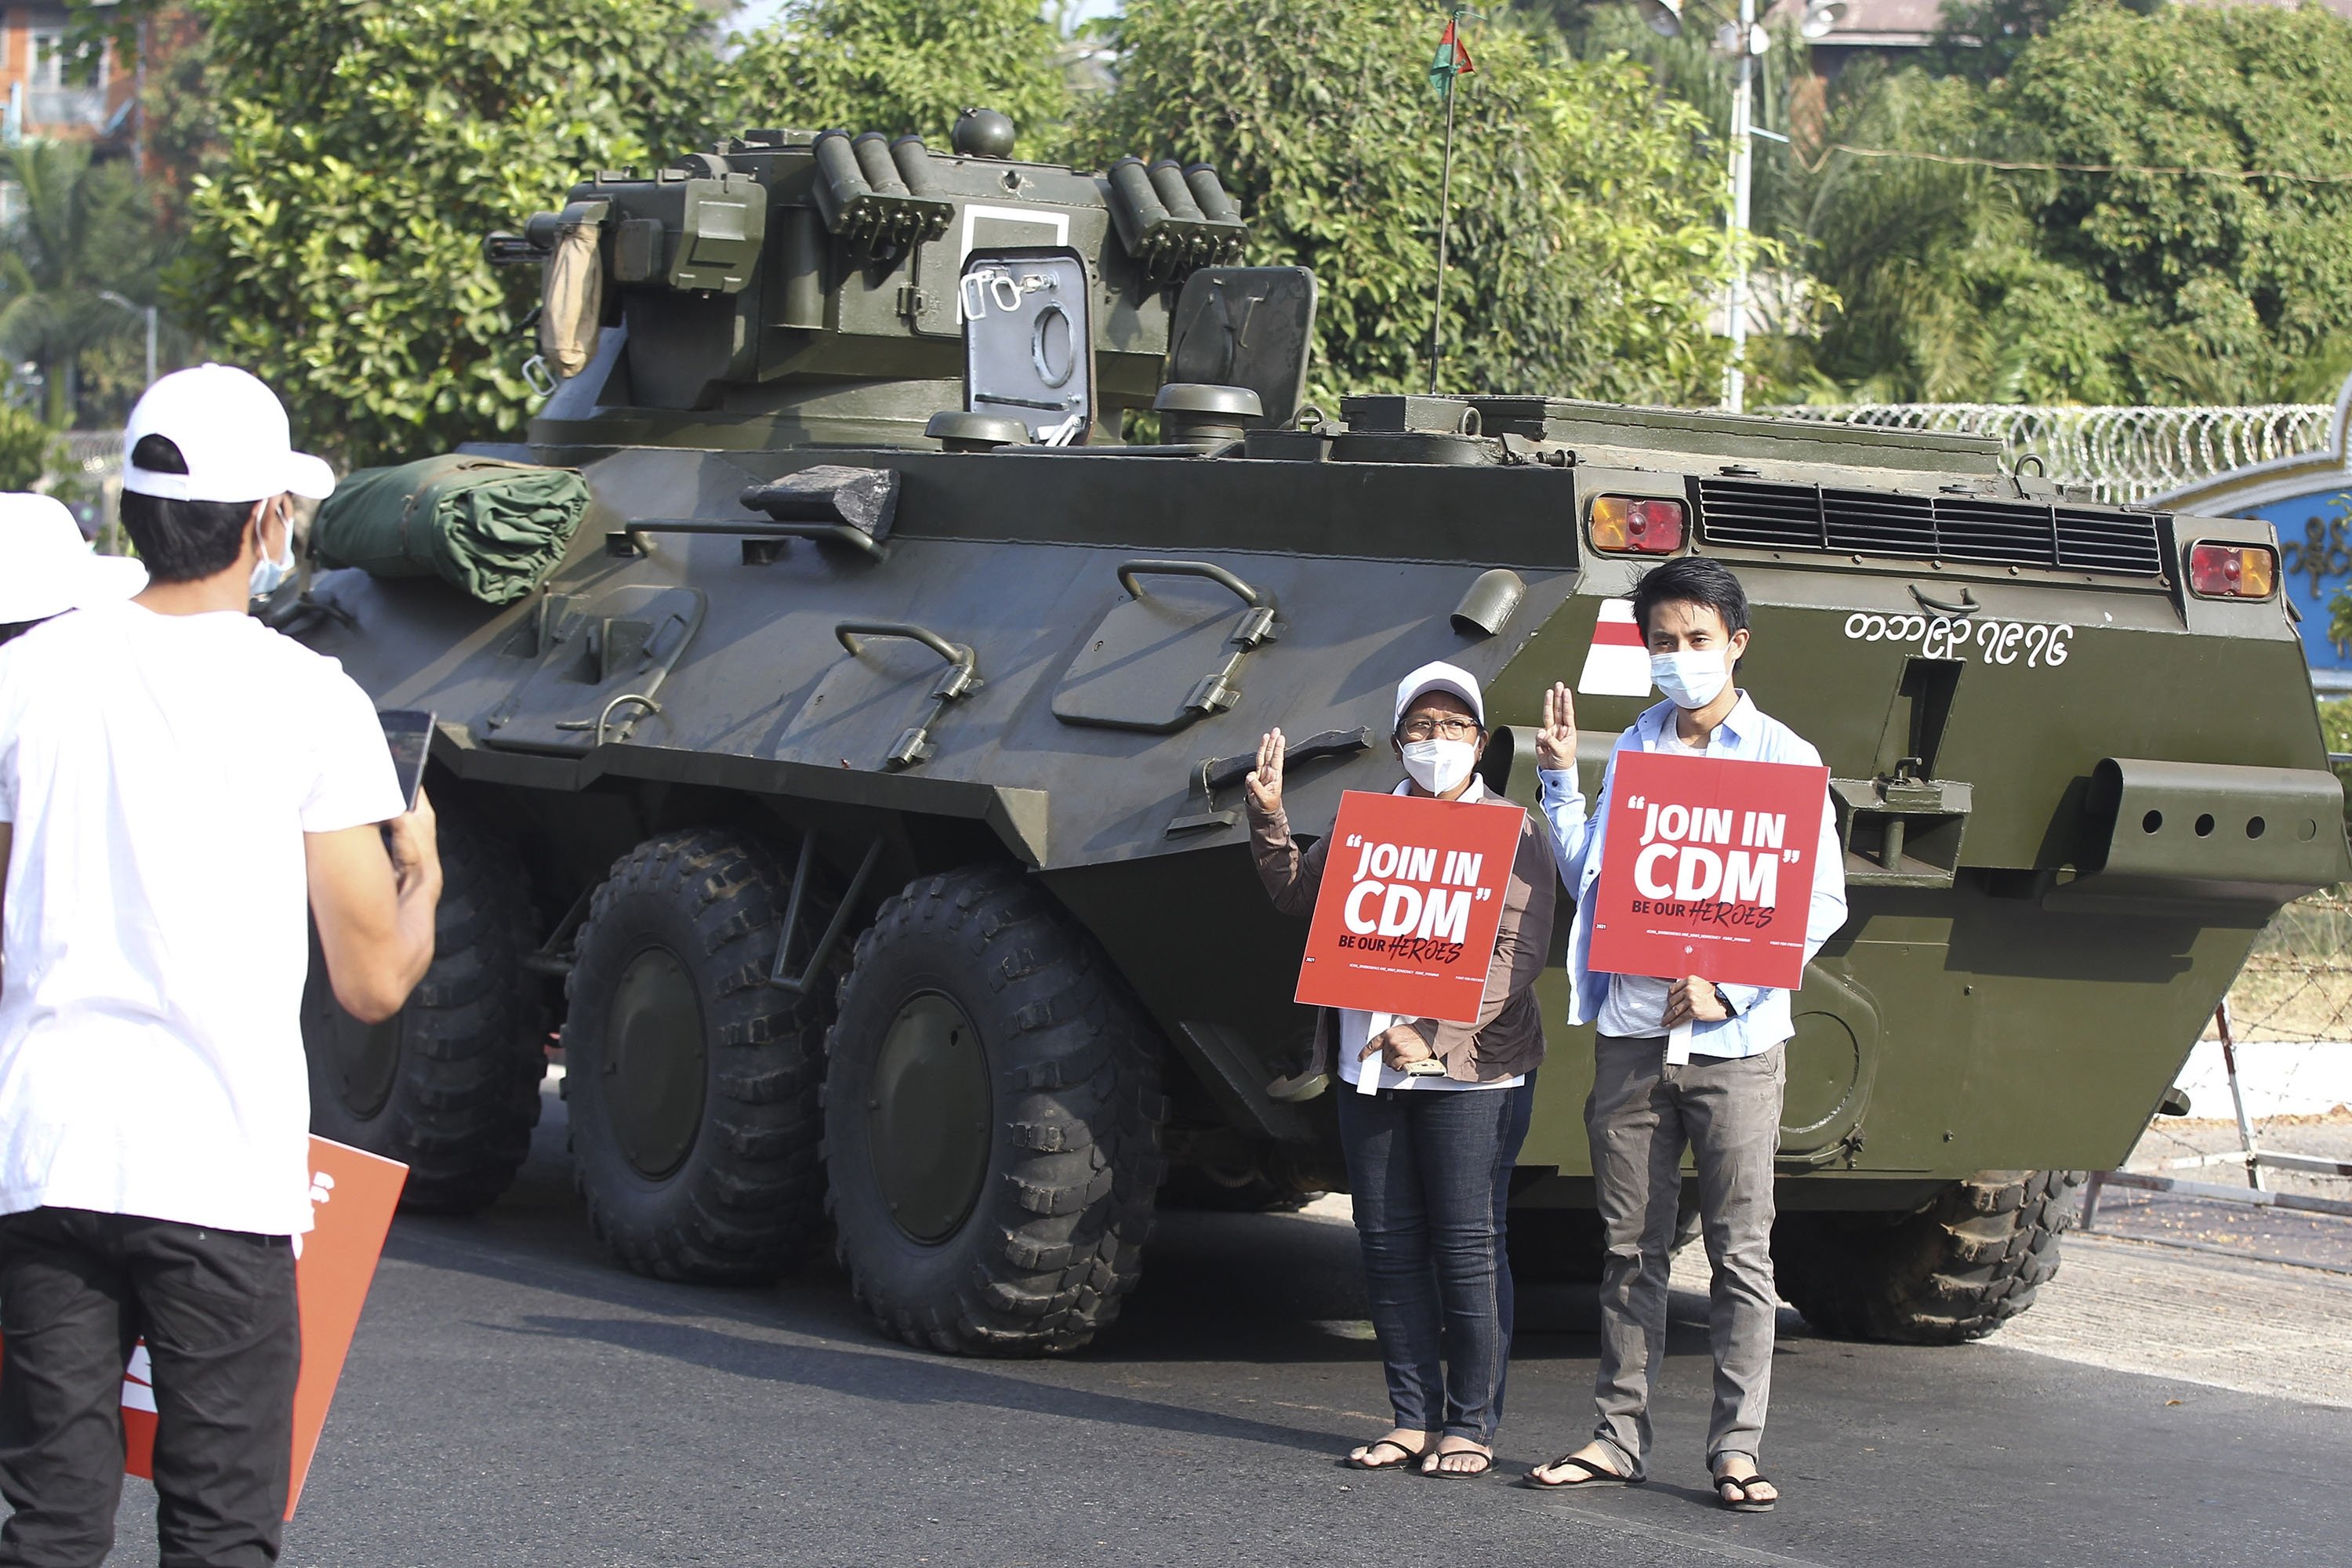 Anti-coup protesters flash the three-fingered salute and hold signs that read 'Join in CDM (Civil Disobedience Movement)' while they pose for a photo at the back of an armored personnel carrier deployed outside the Central Bank of Myanmar building in Yangon, Myanmar, Feb. 15, 2021. (AP Photo)